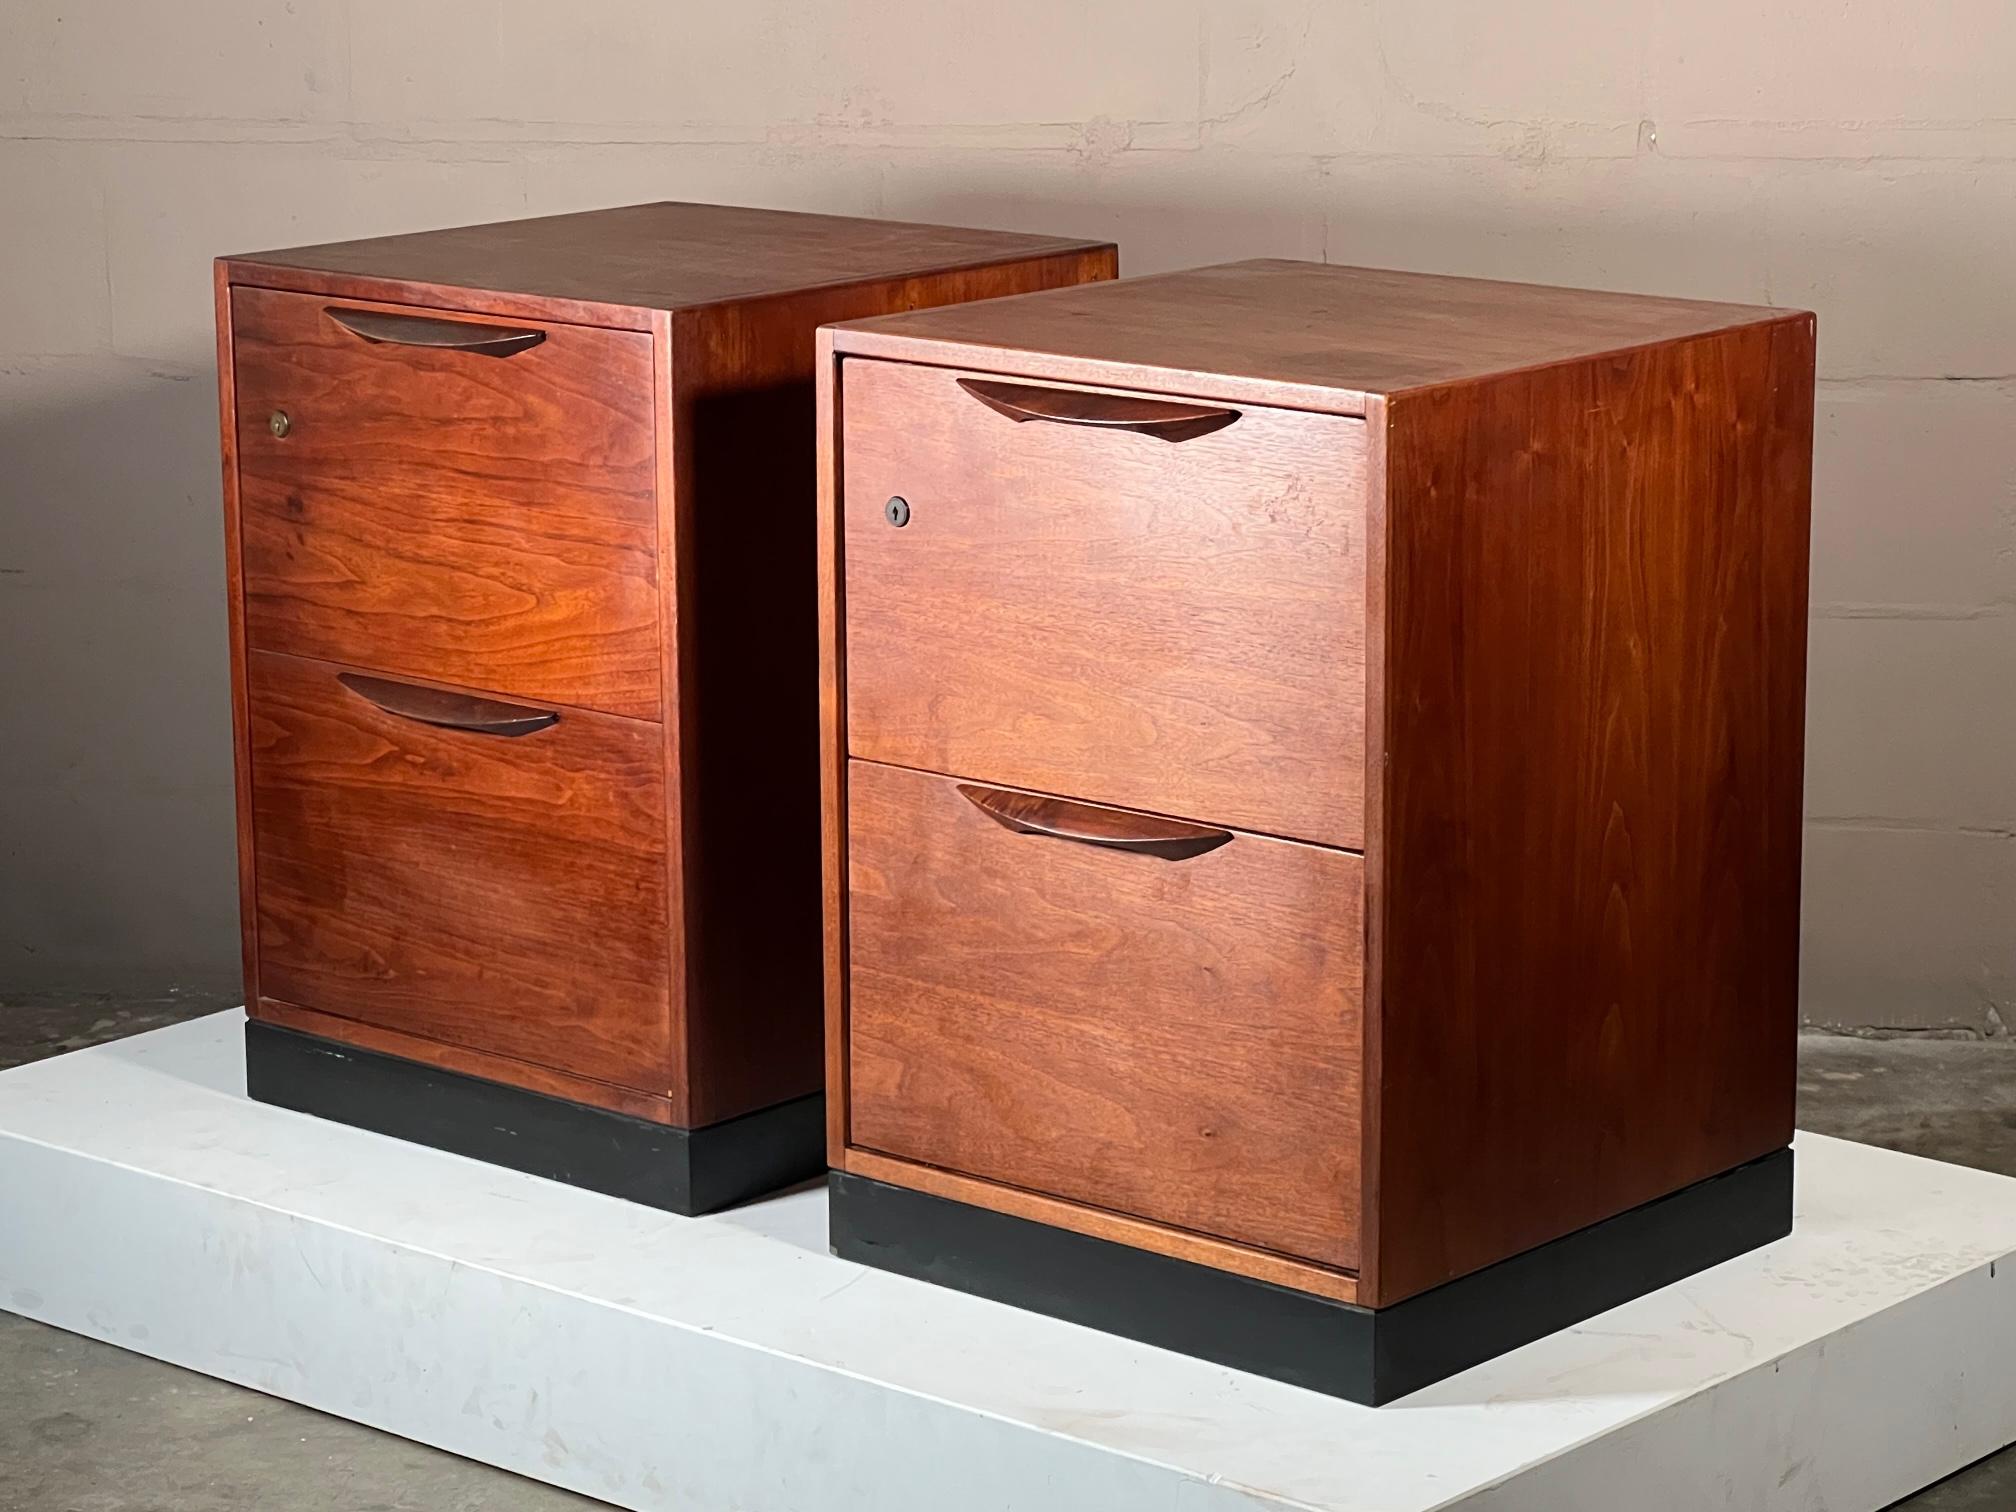 A pair of classic filing cabinets by Jens Risom, ca' 1960's. Made of walnut with sculpted handles and finished backs. These versatile, cube shaped cabinets could be used as night stands, pedestals for a desk, etc.